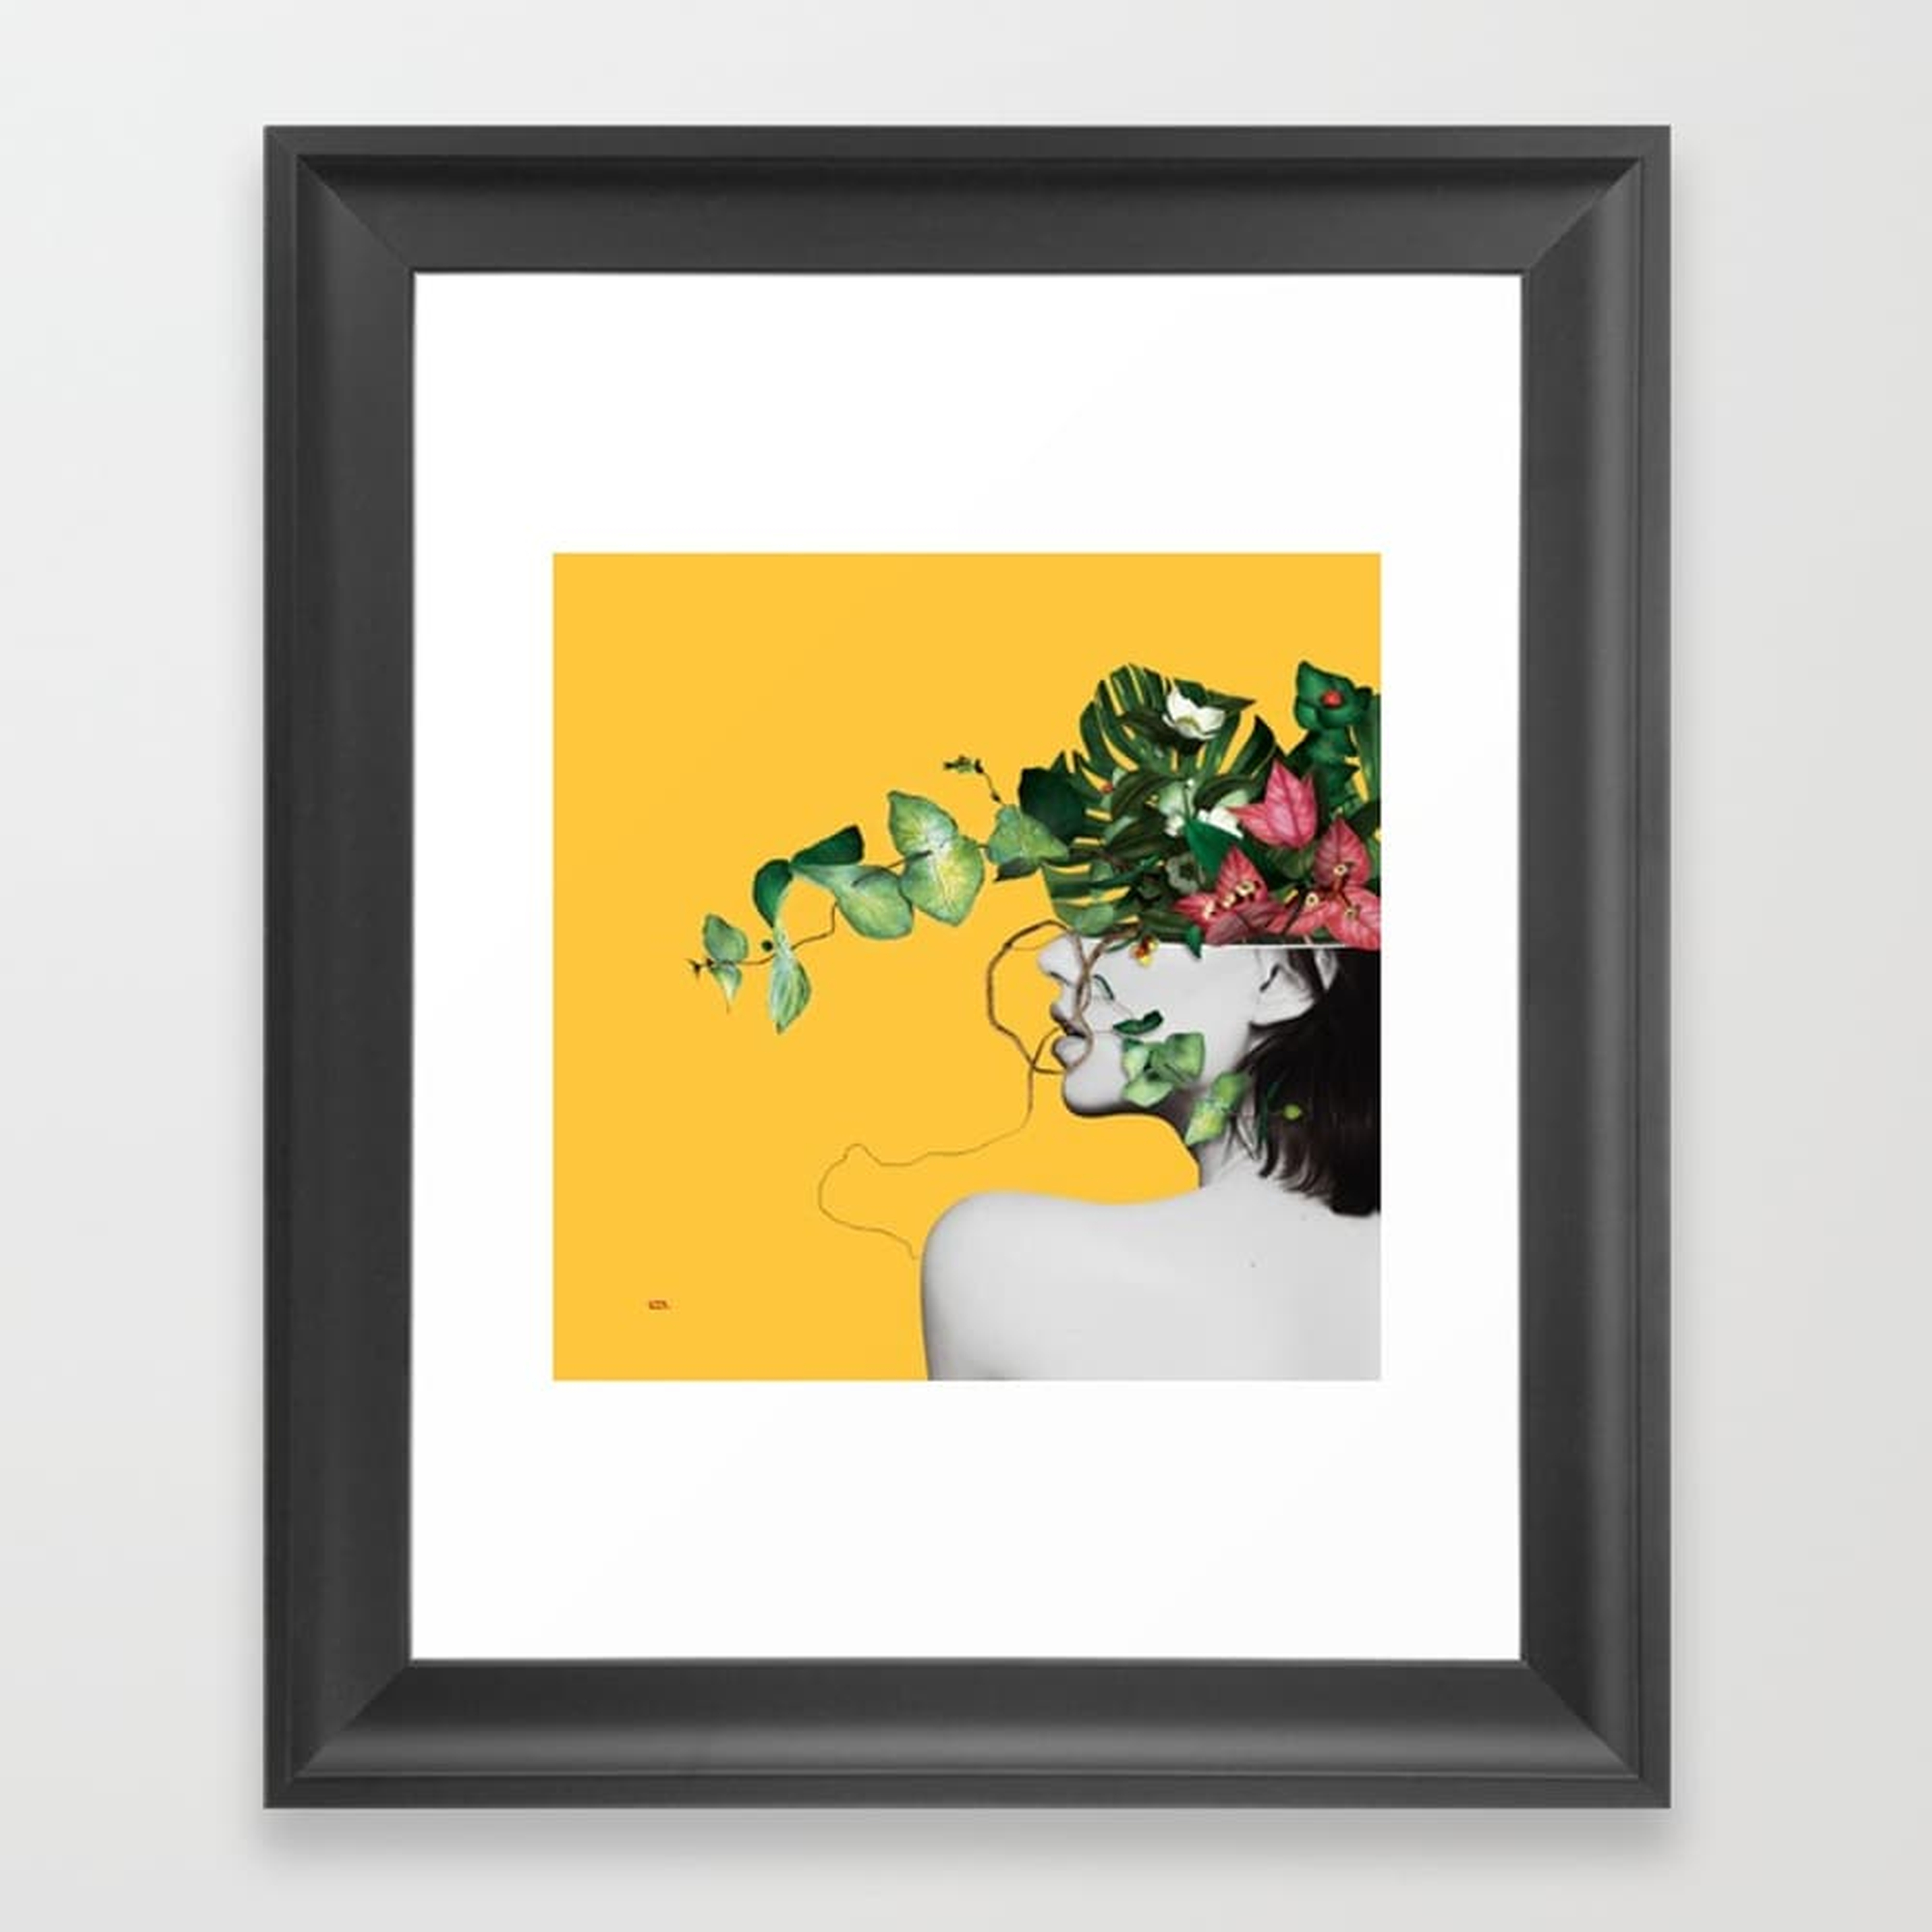 Lady Flowers Framed Art Print - Scoop Black small 15" x 21" by Linco7n - Society6